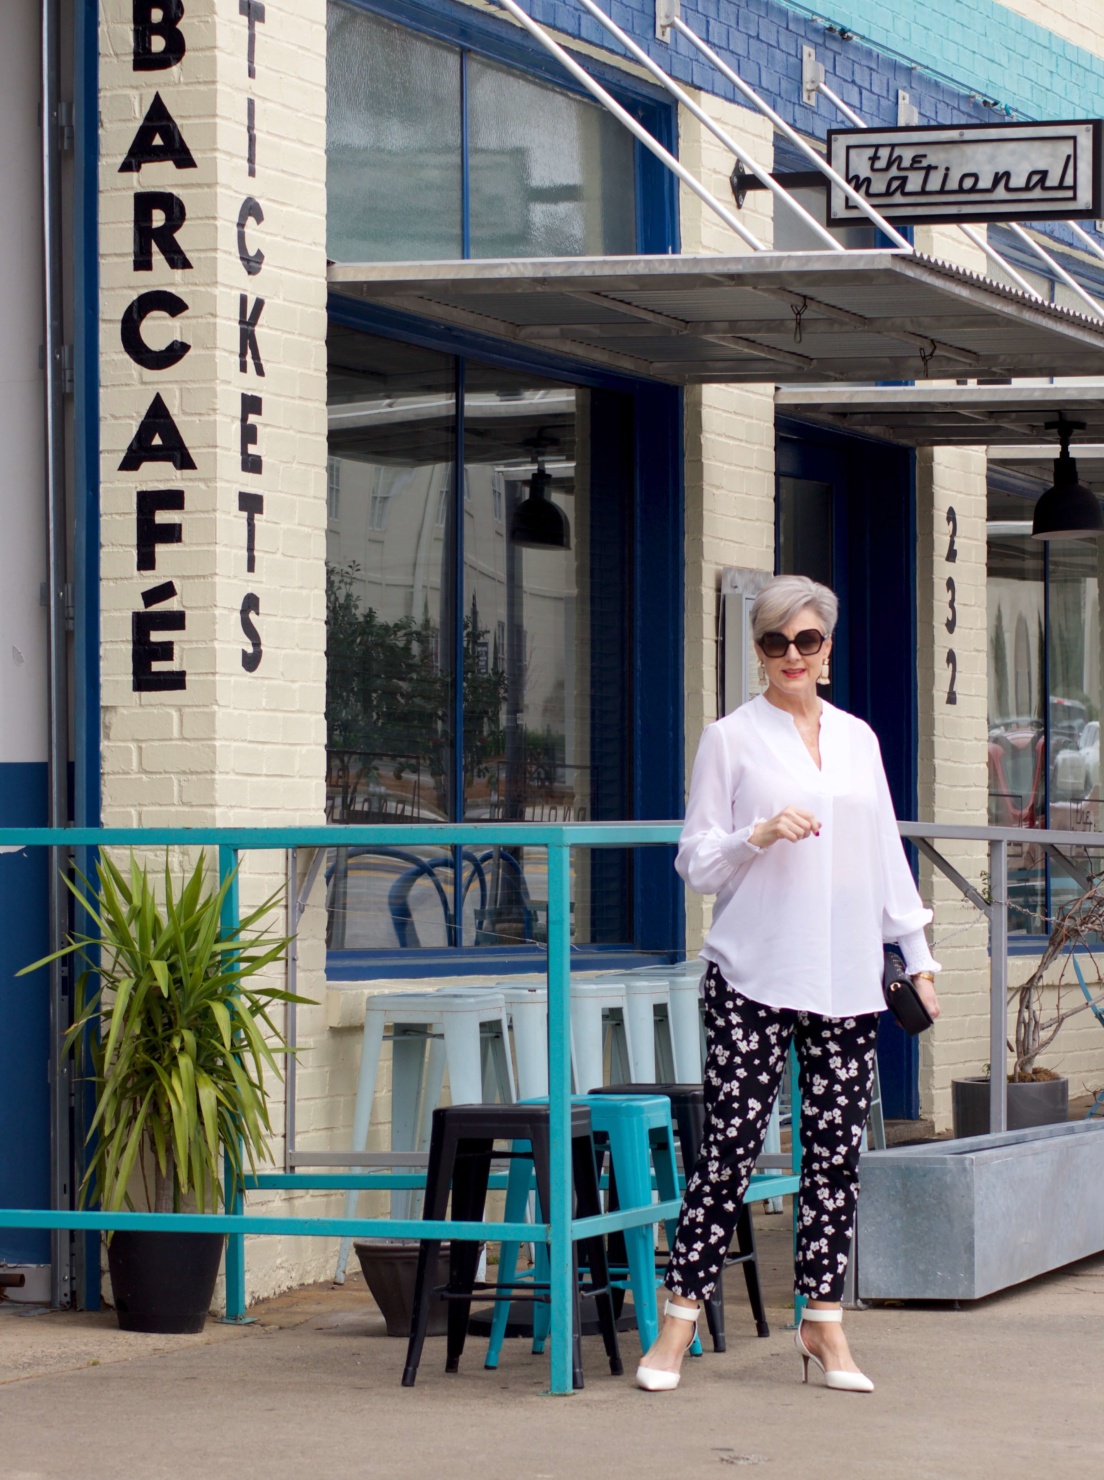 beth from Style at a Certain Age wears an outfit from Lord & Taylor, black pattern pants, white tunic blouse, Sam Edelman shoes